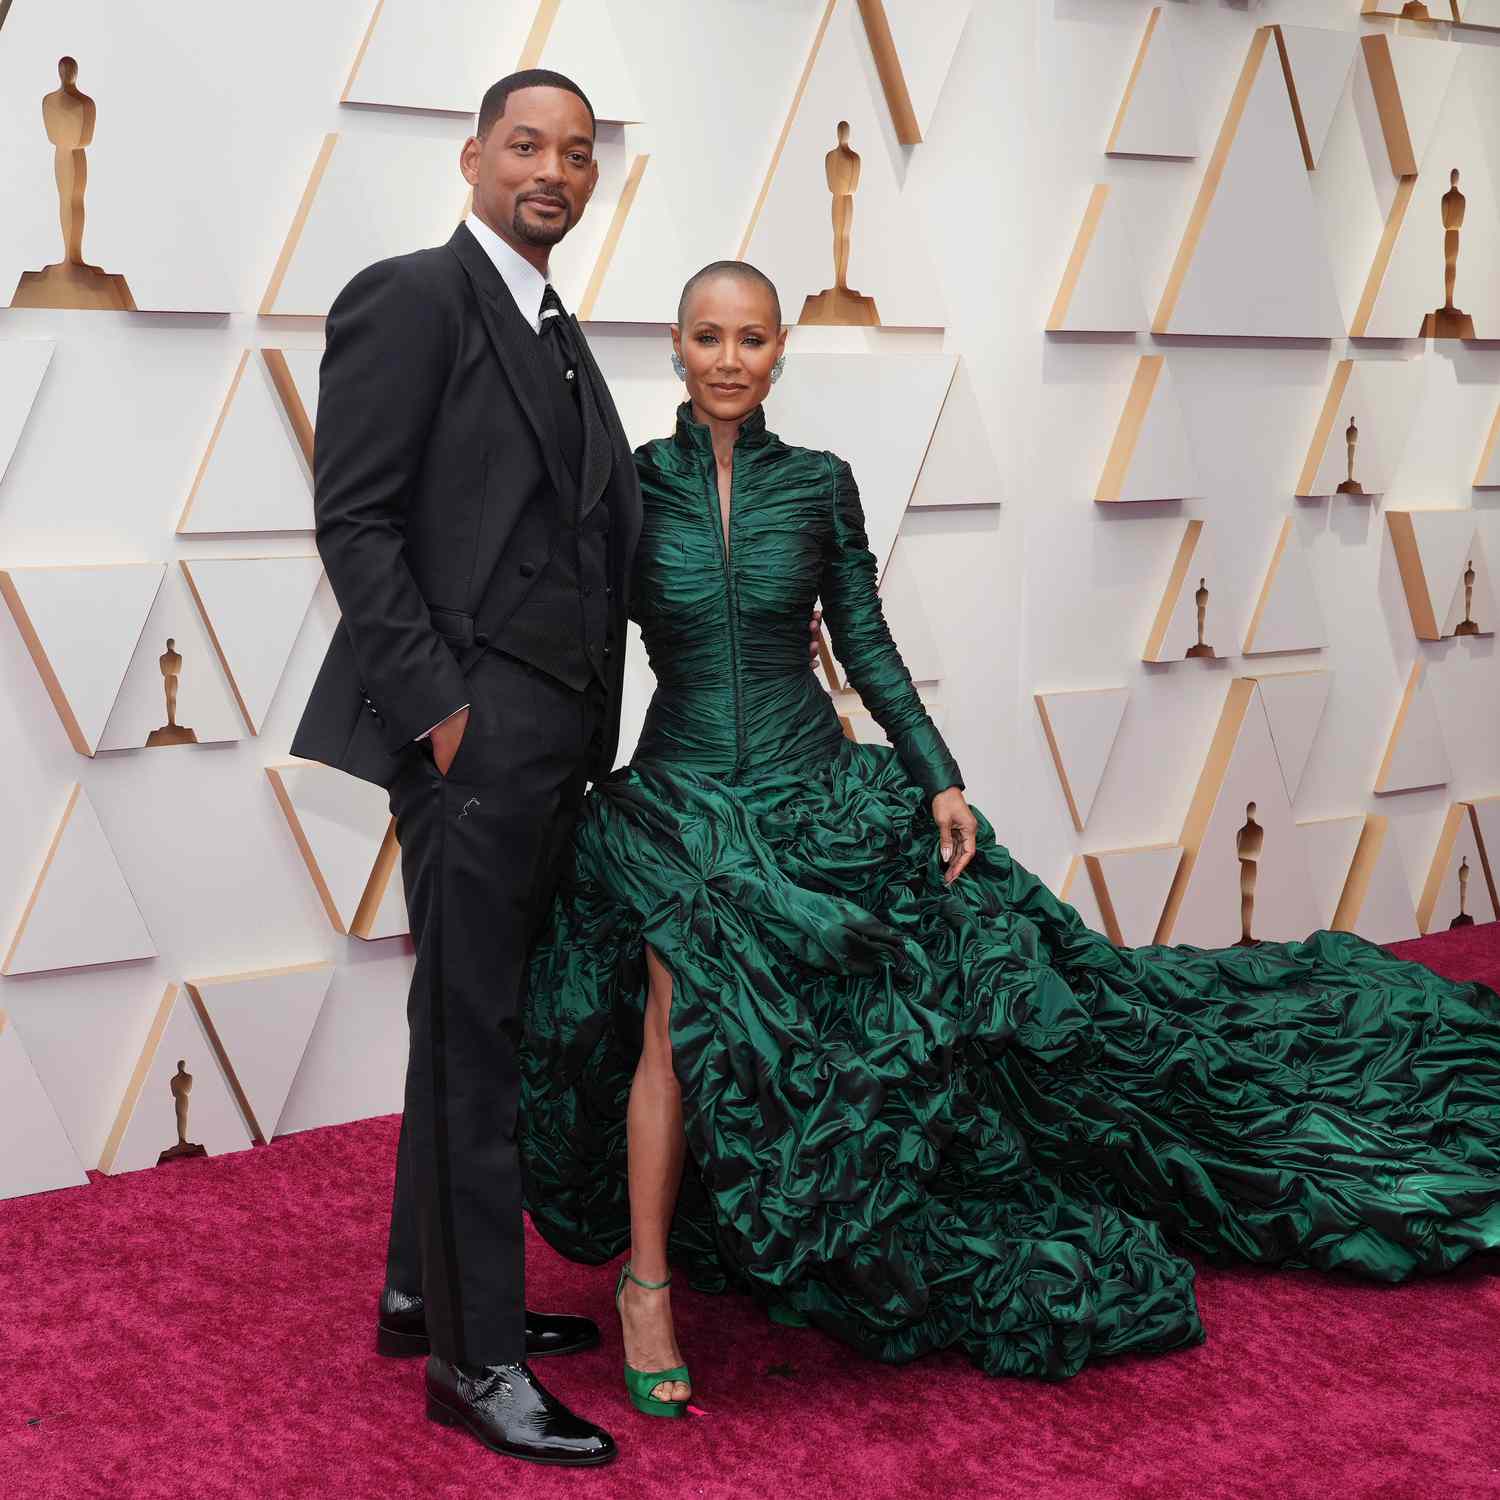 “We are staying together forever” - Jada Pinkett Smith speaks on separation with Will Smith